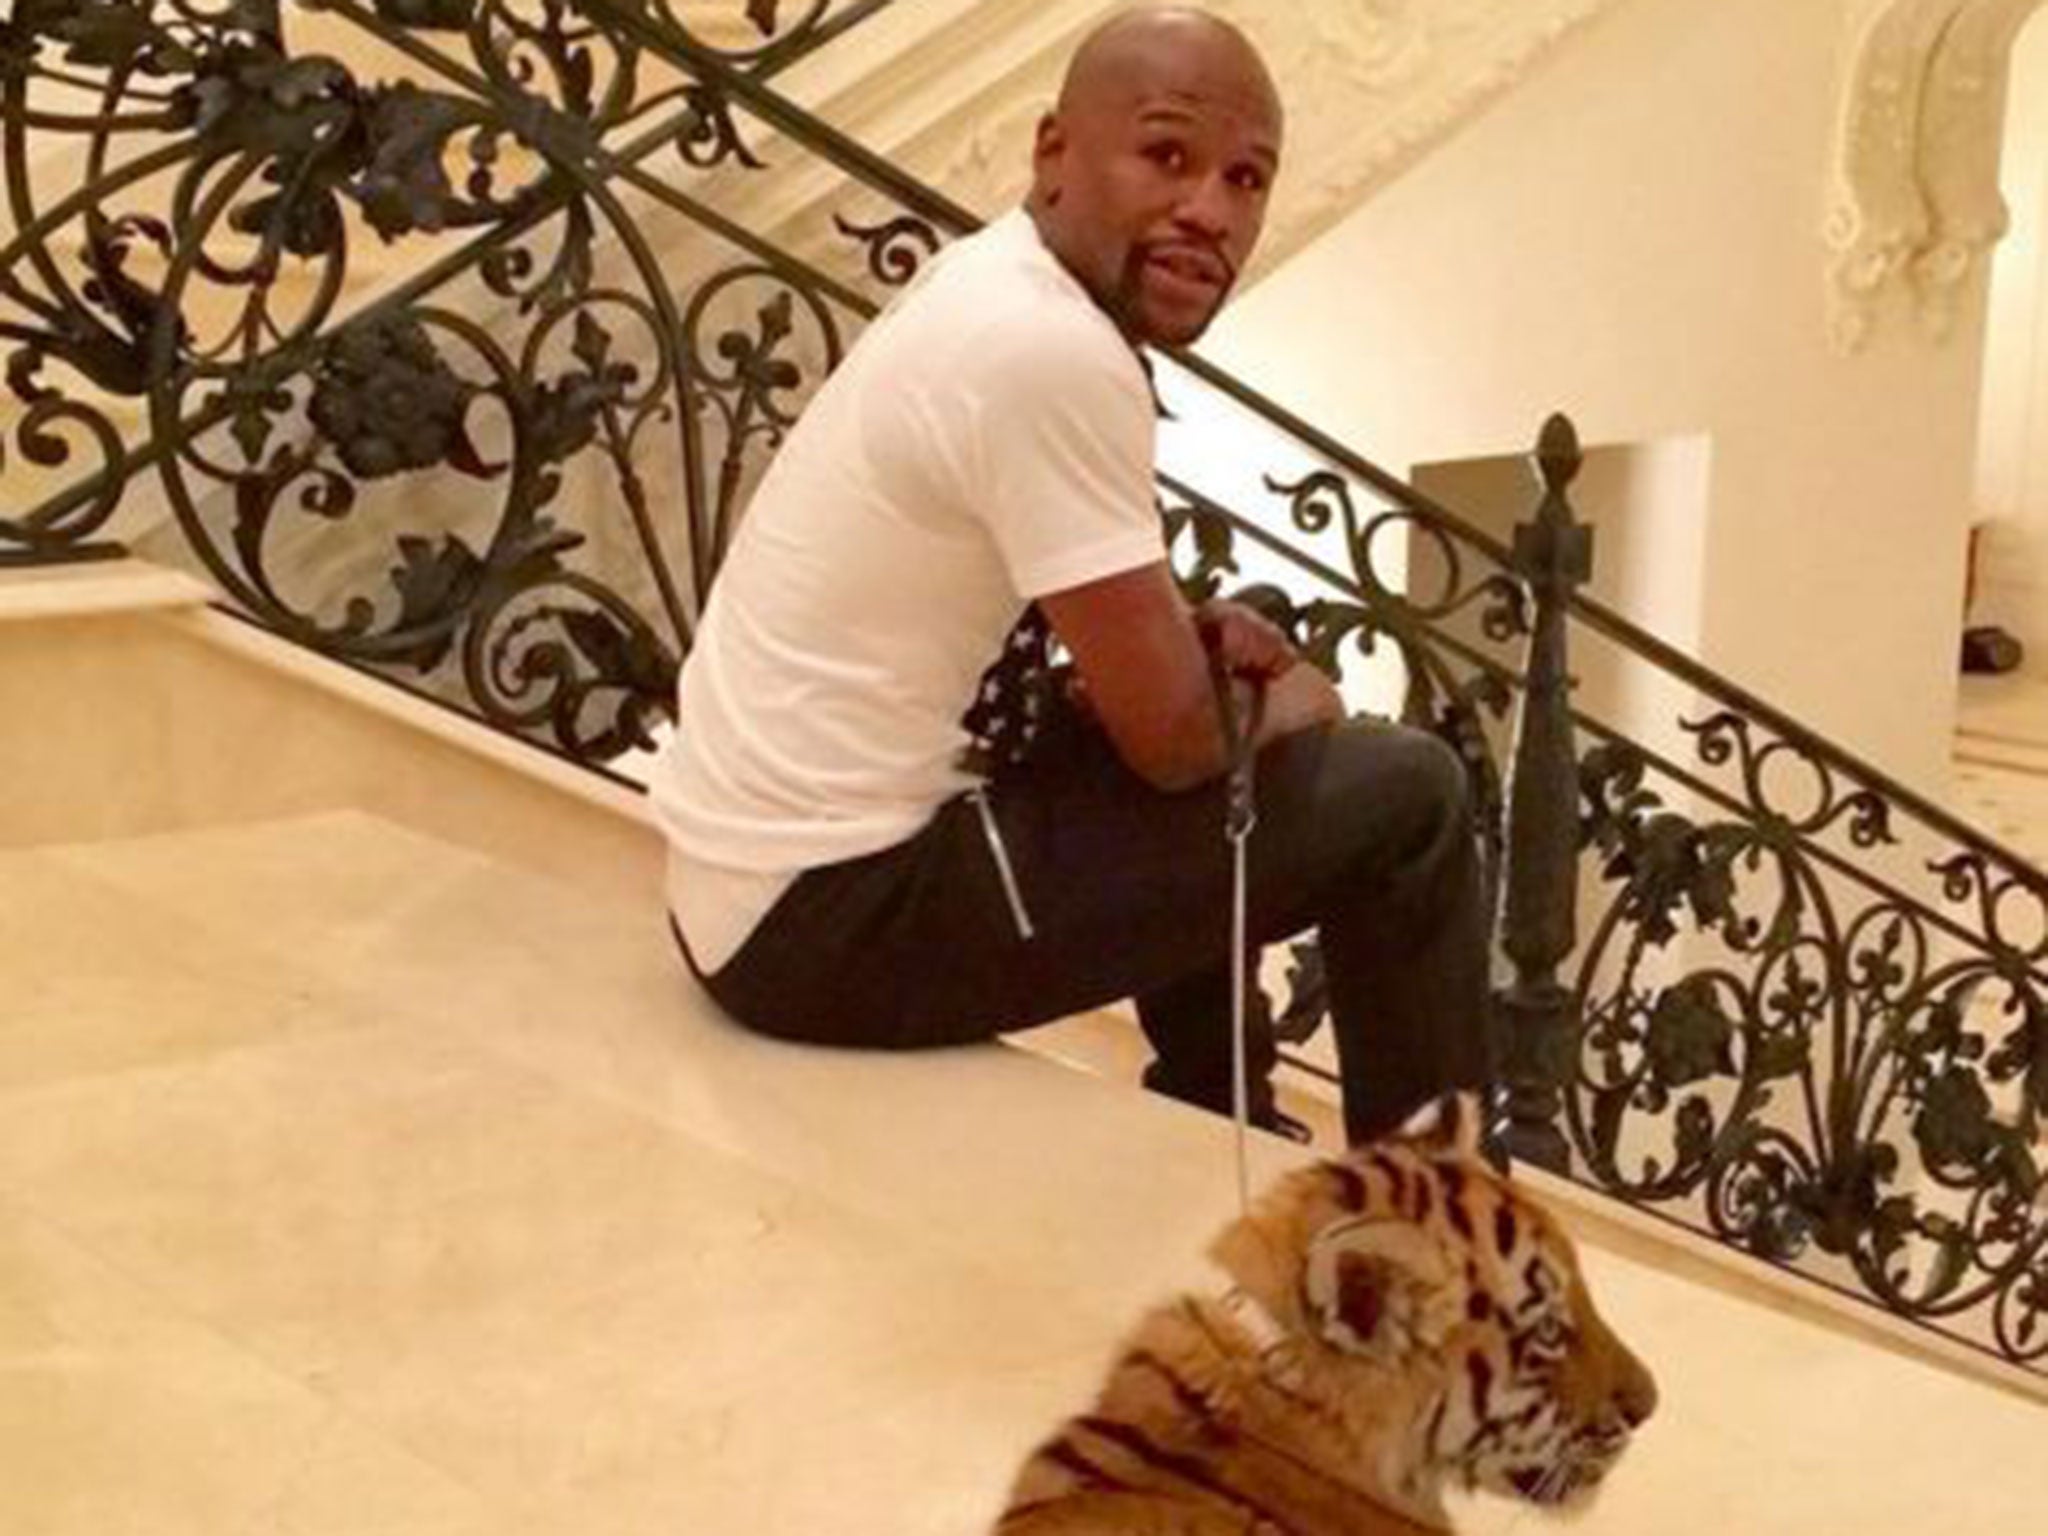 Floyd Mayweather posted a picture of himself with a pet tiger on Instagram